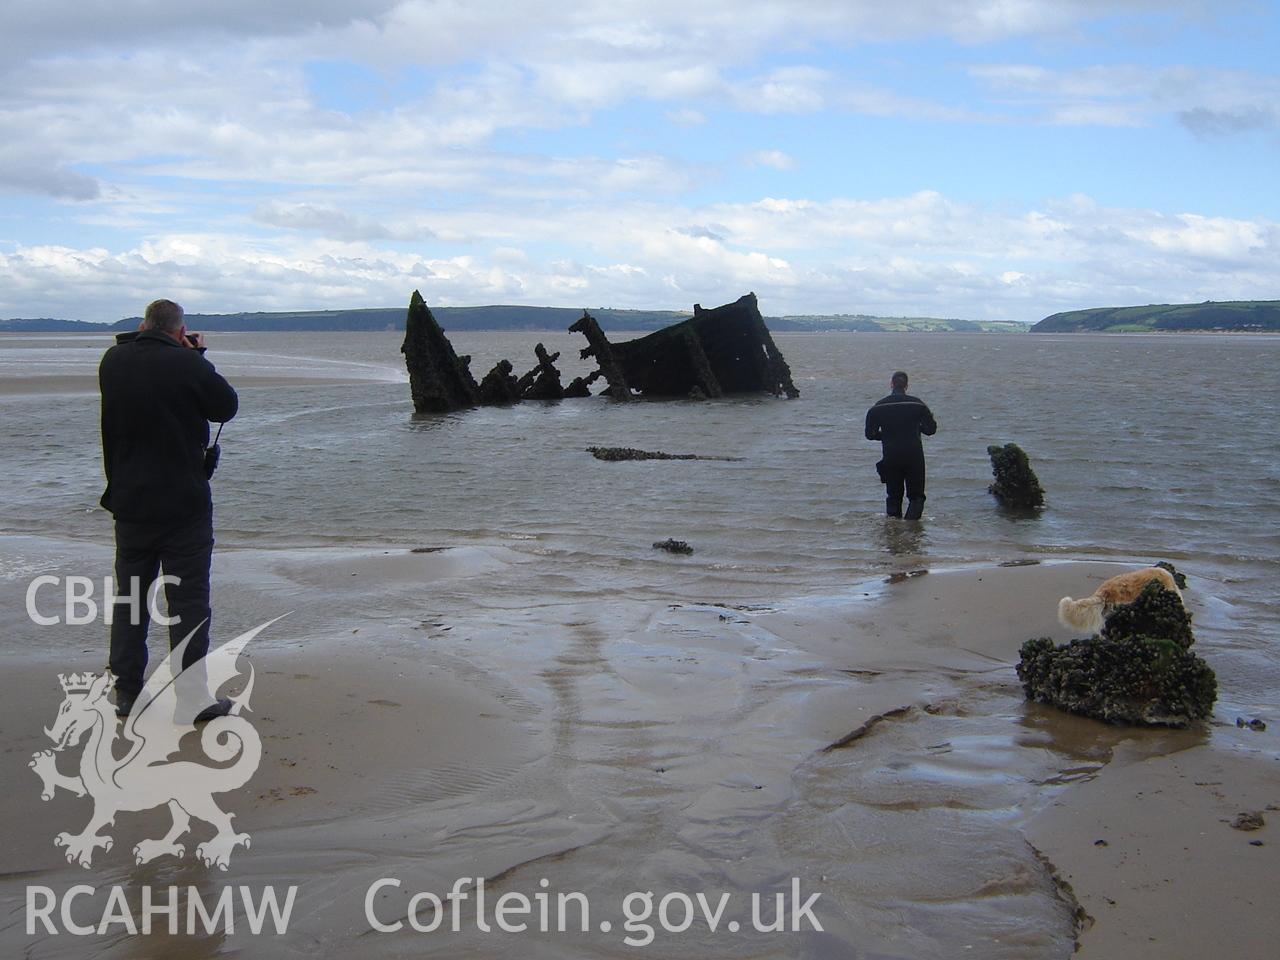 Digital photograph showing the wreck of the Teviotdale on Cefn Sidan Beach, produced by Ian Cundy, August 2010